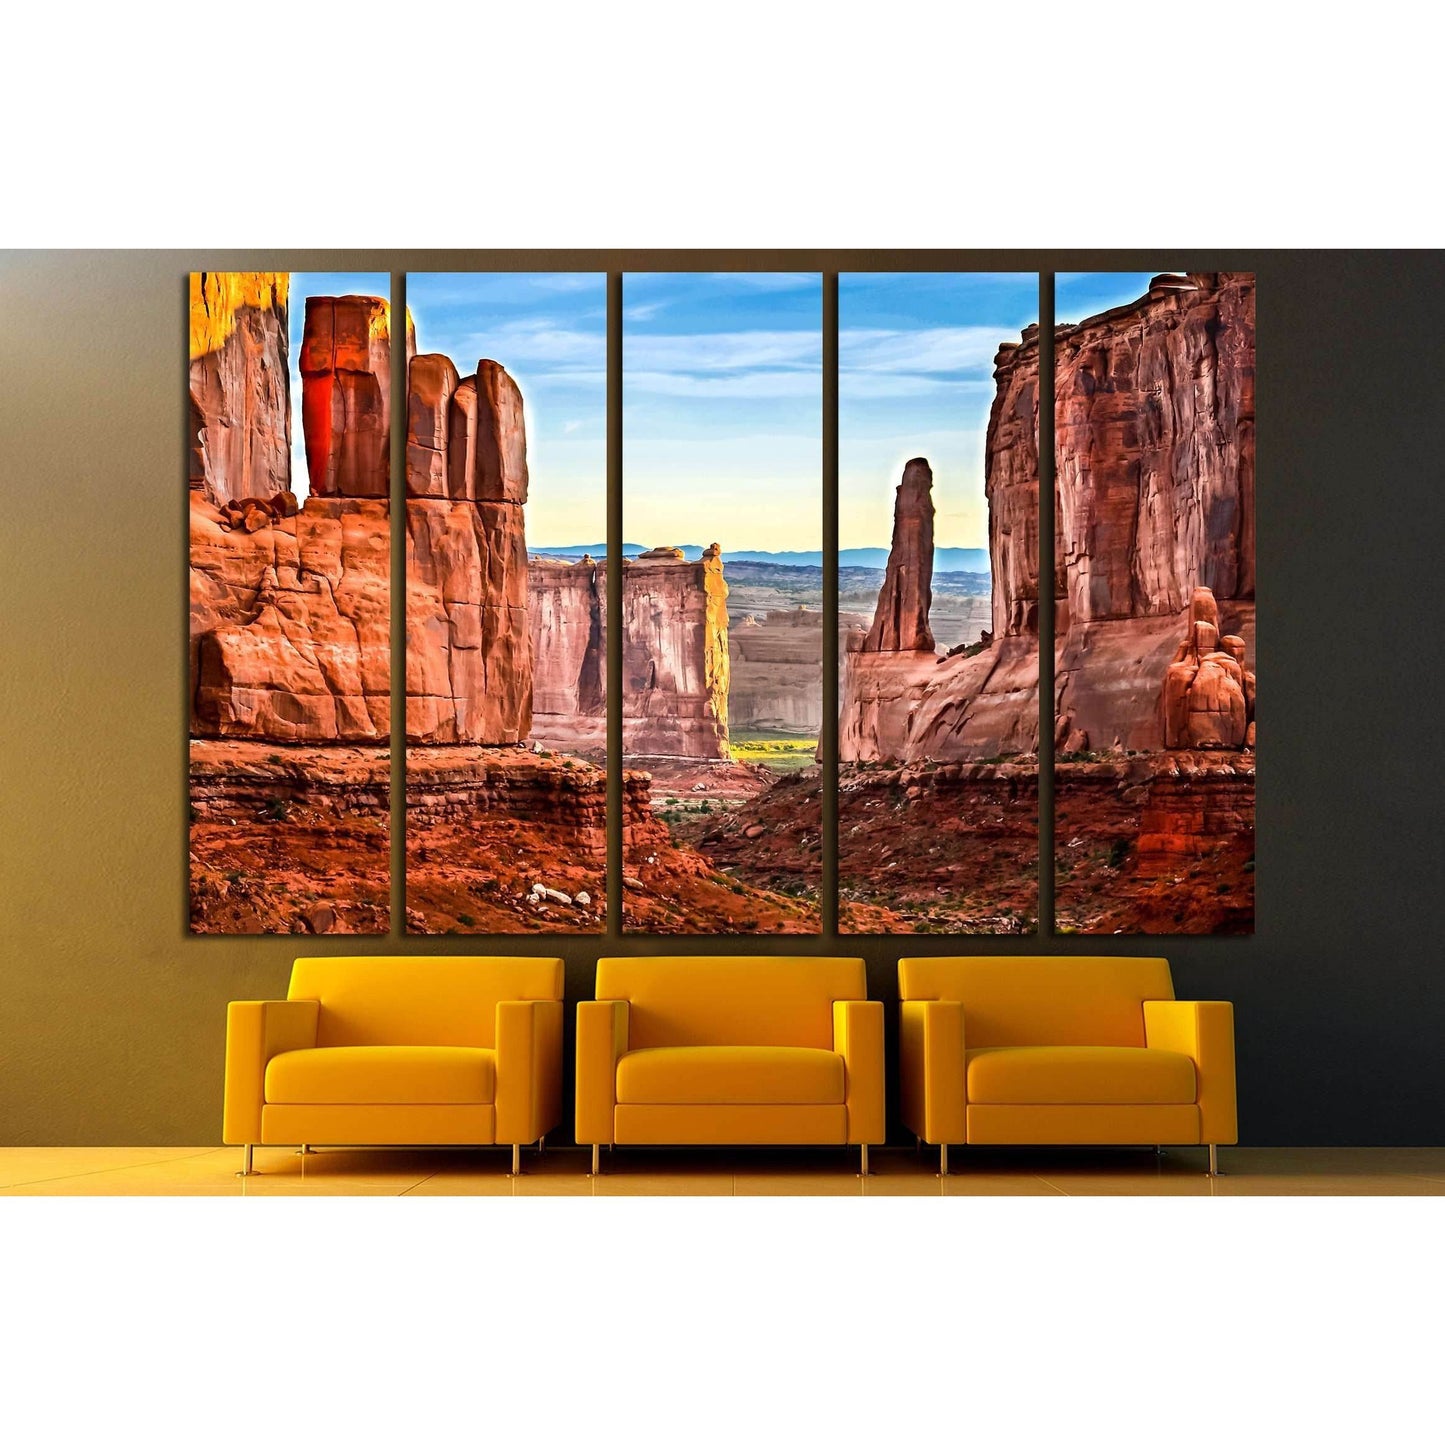 Majestic Sandstone Cliffs Wall Art for Rustic Interior ThemesThis canvas print beautifully captures the rugged grandeur of desert rock formations under a clear sky. The rich, warm hues of the rocks are striking against the expansive view, making it an exc